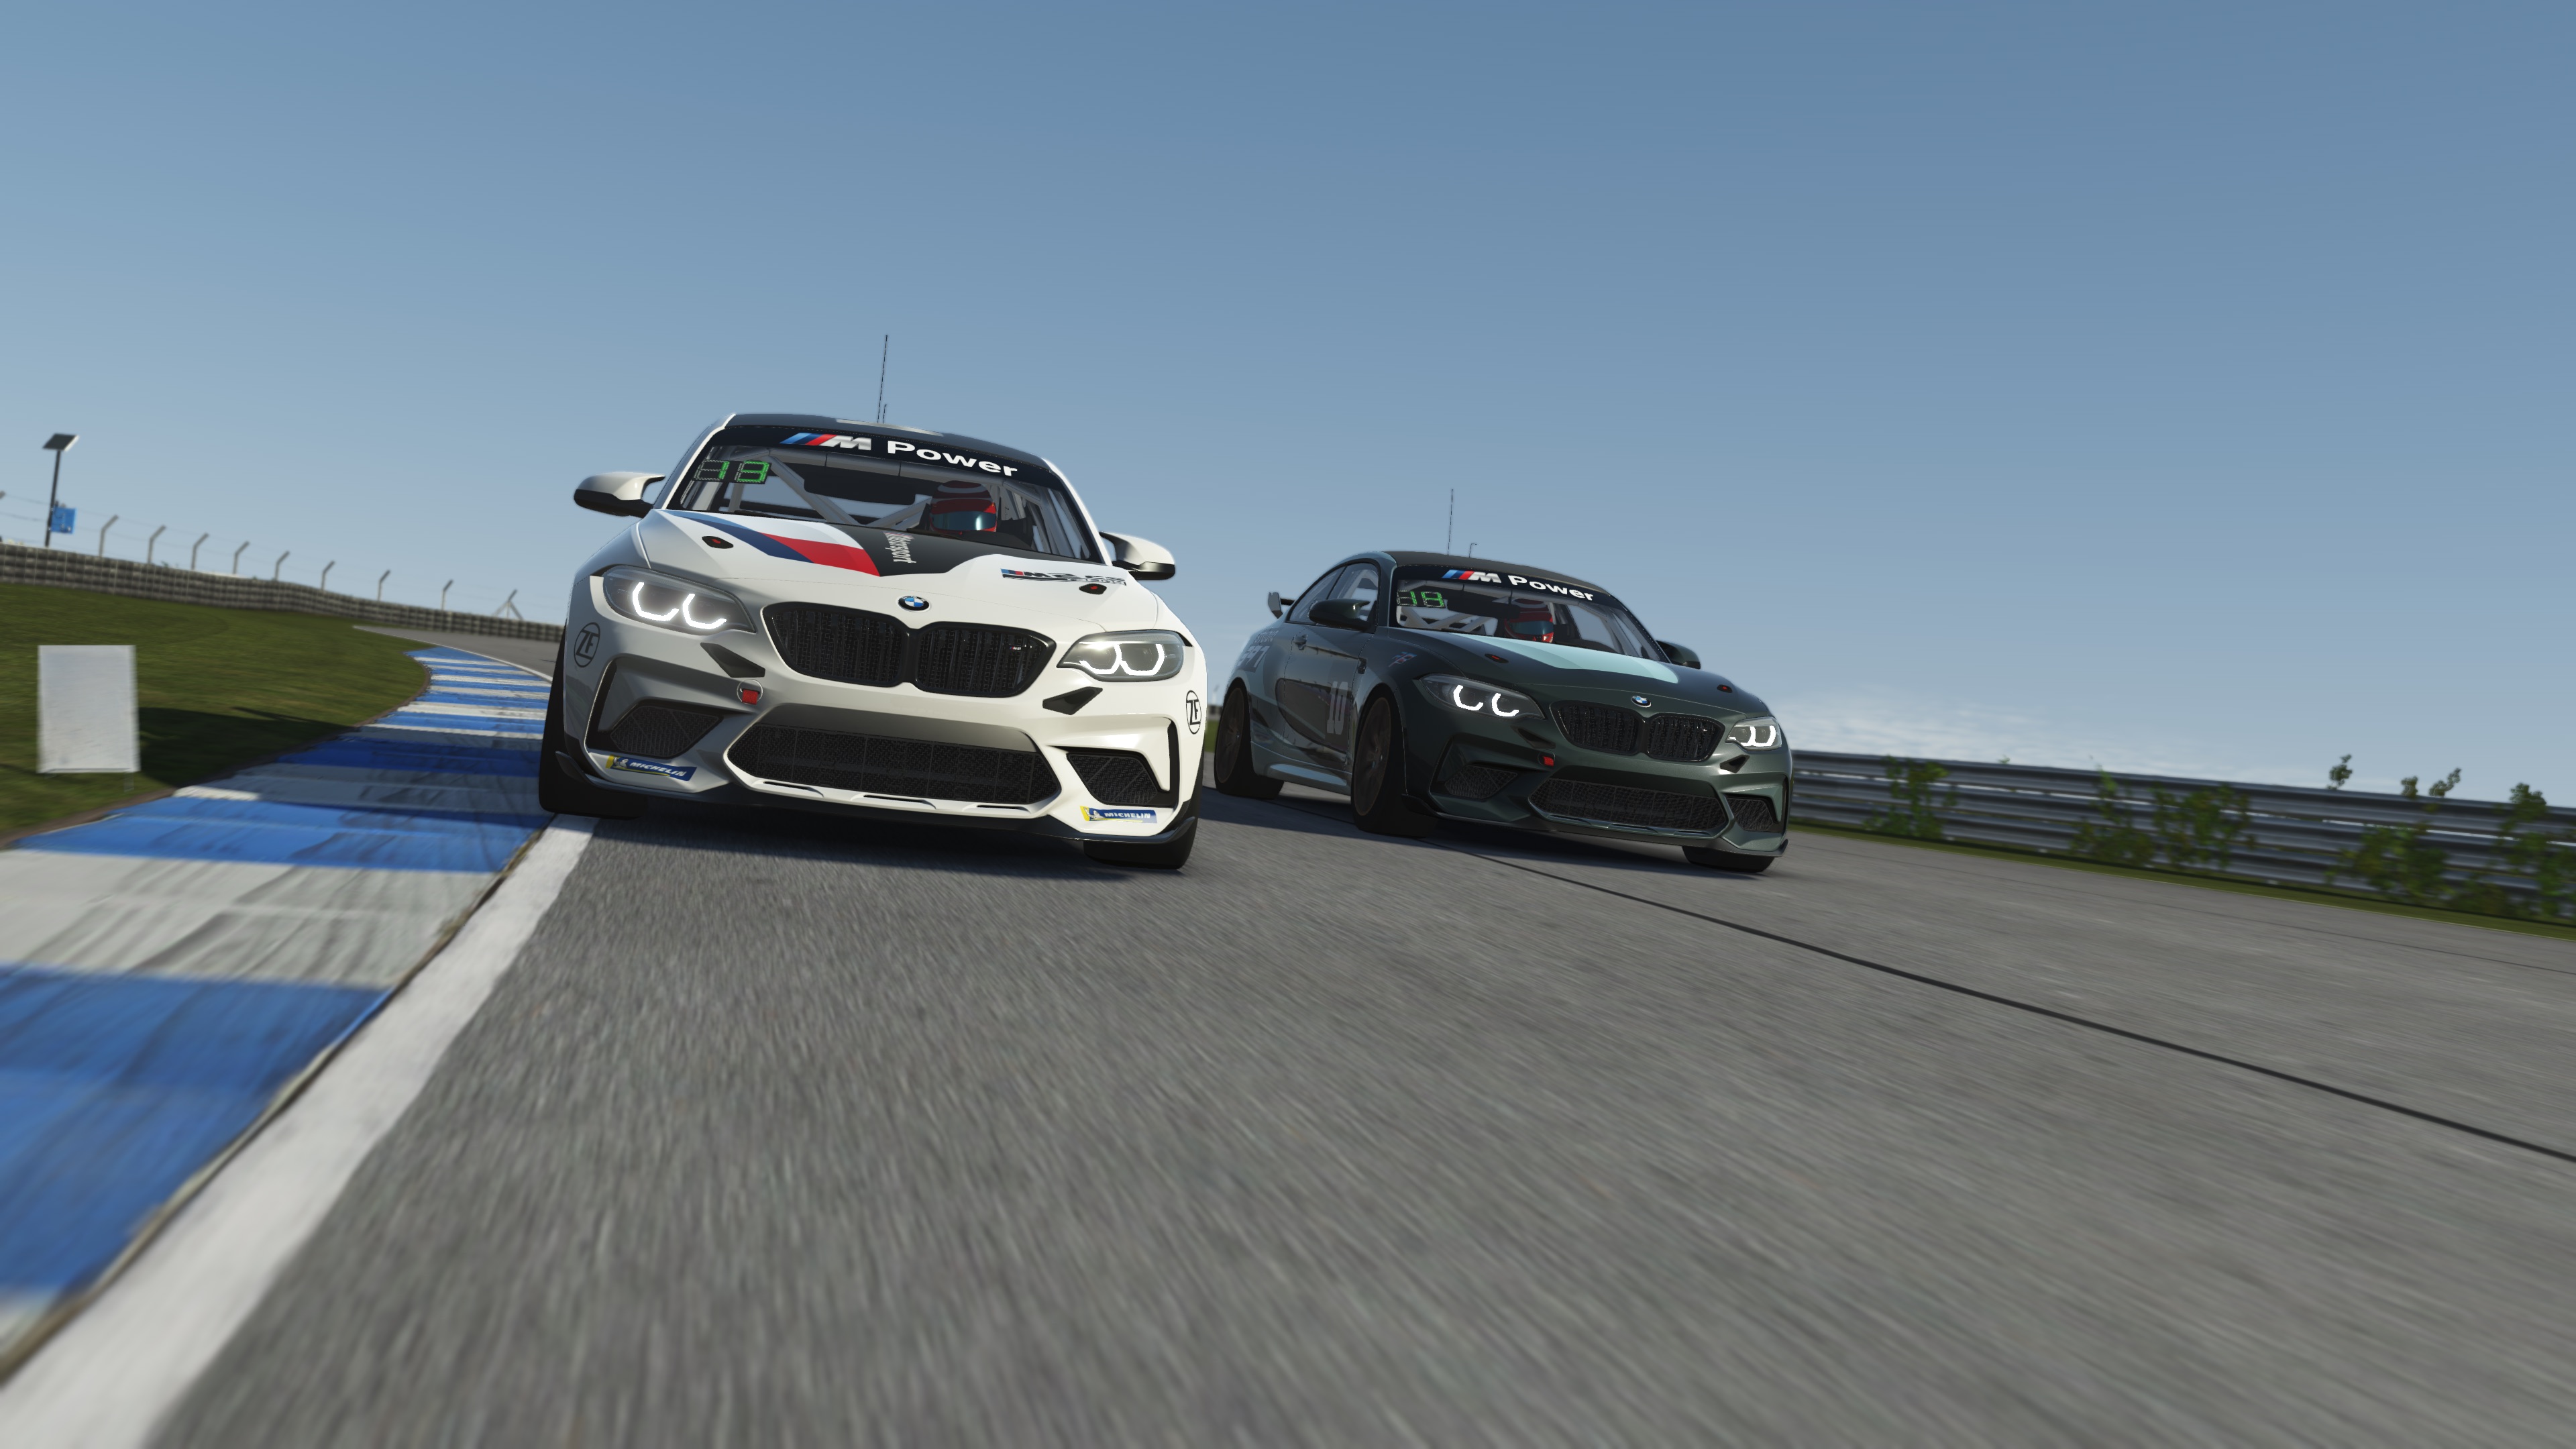 GRID: Autosport PC Install Size is 11 GB, Texture Pack Went from 30 GB to 5  GB